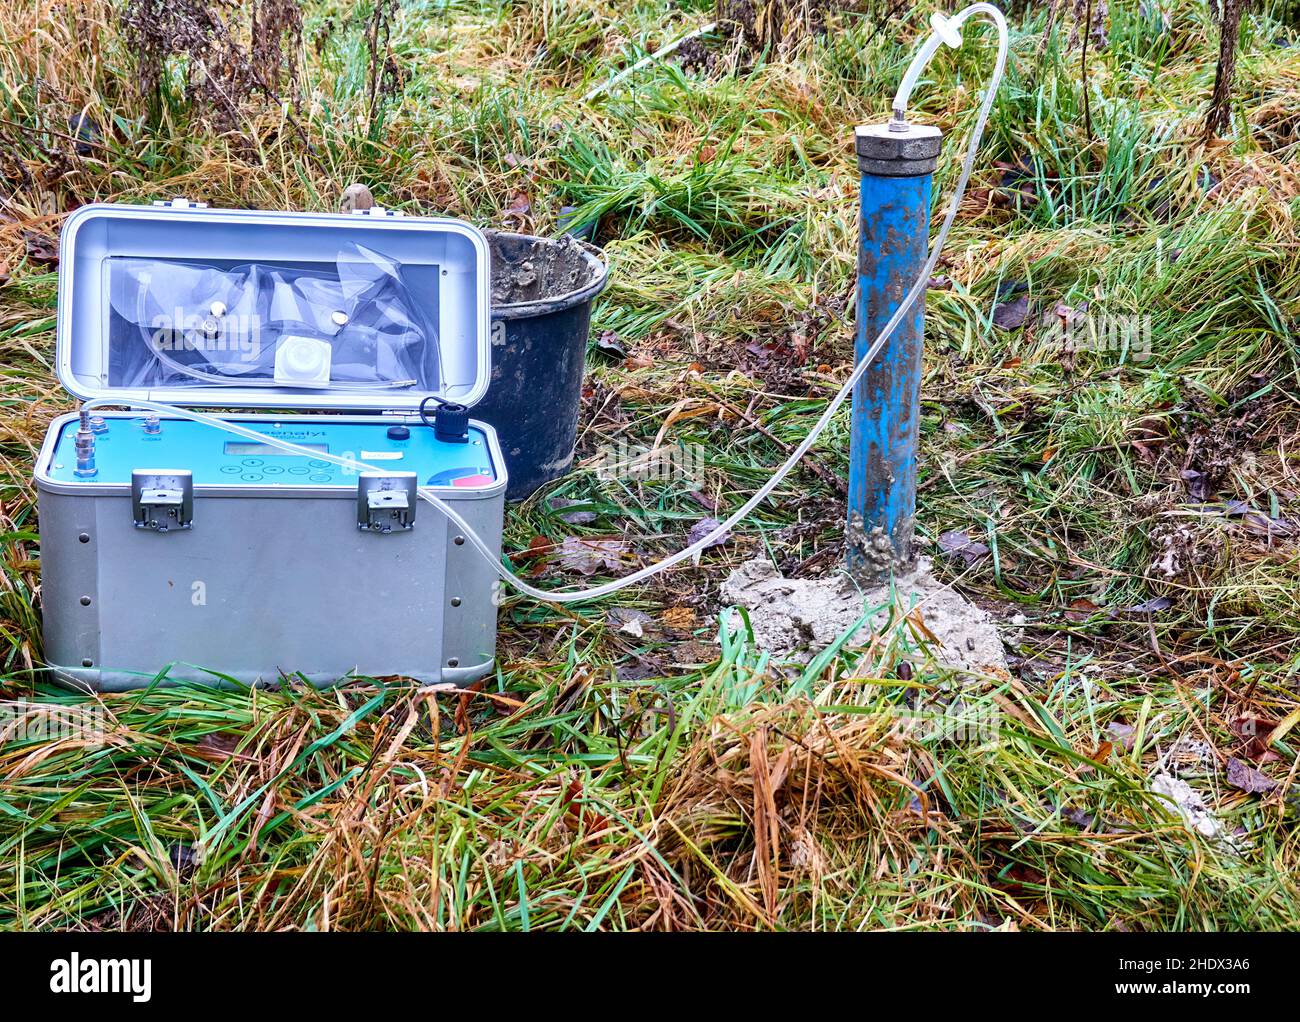 Braunschweig, Germany, December 15., 2021: Soil air level with connected soil air pump with sensors for measuring the soil gases methane, carbon dioxi Stock Photo